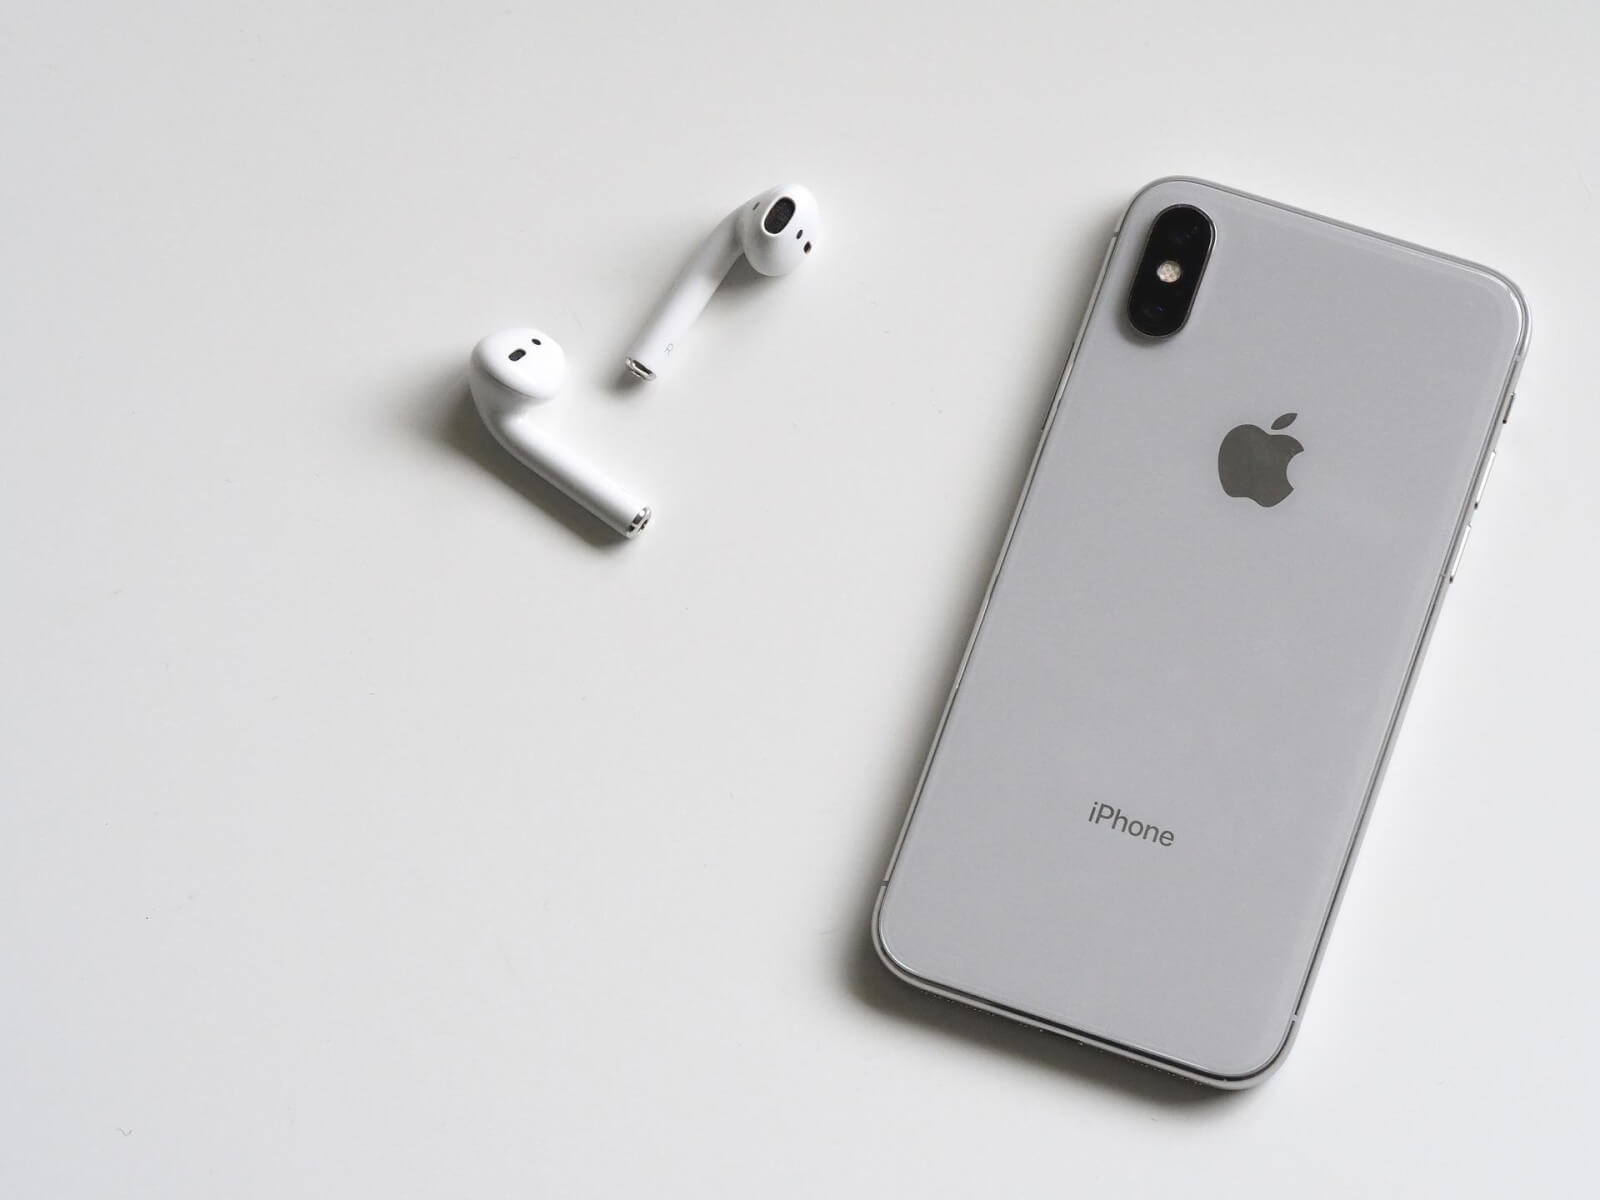 iphone x and airpods